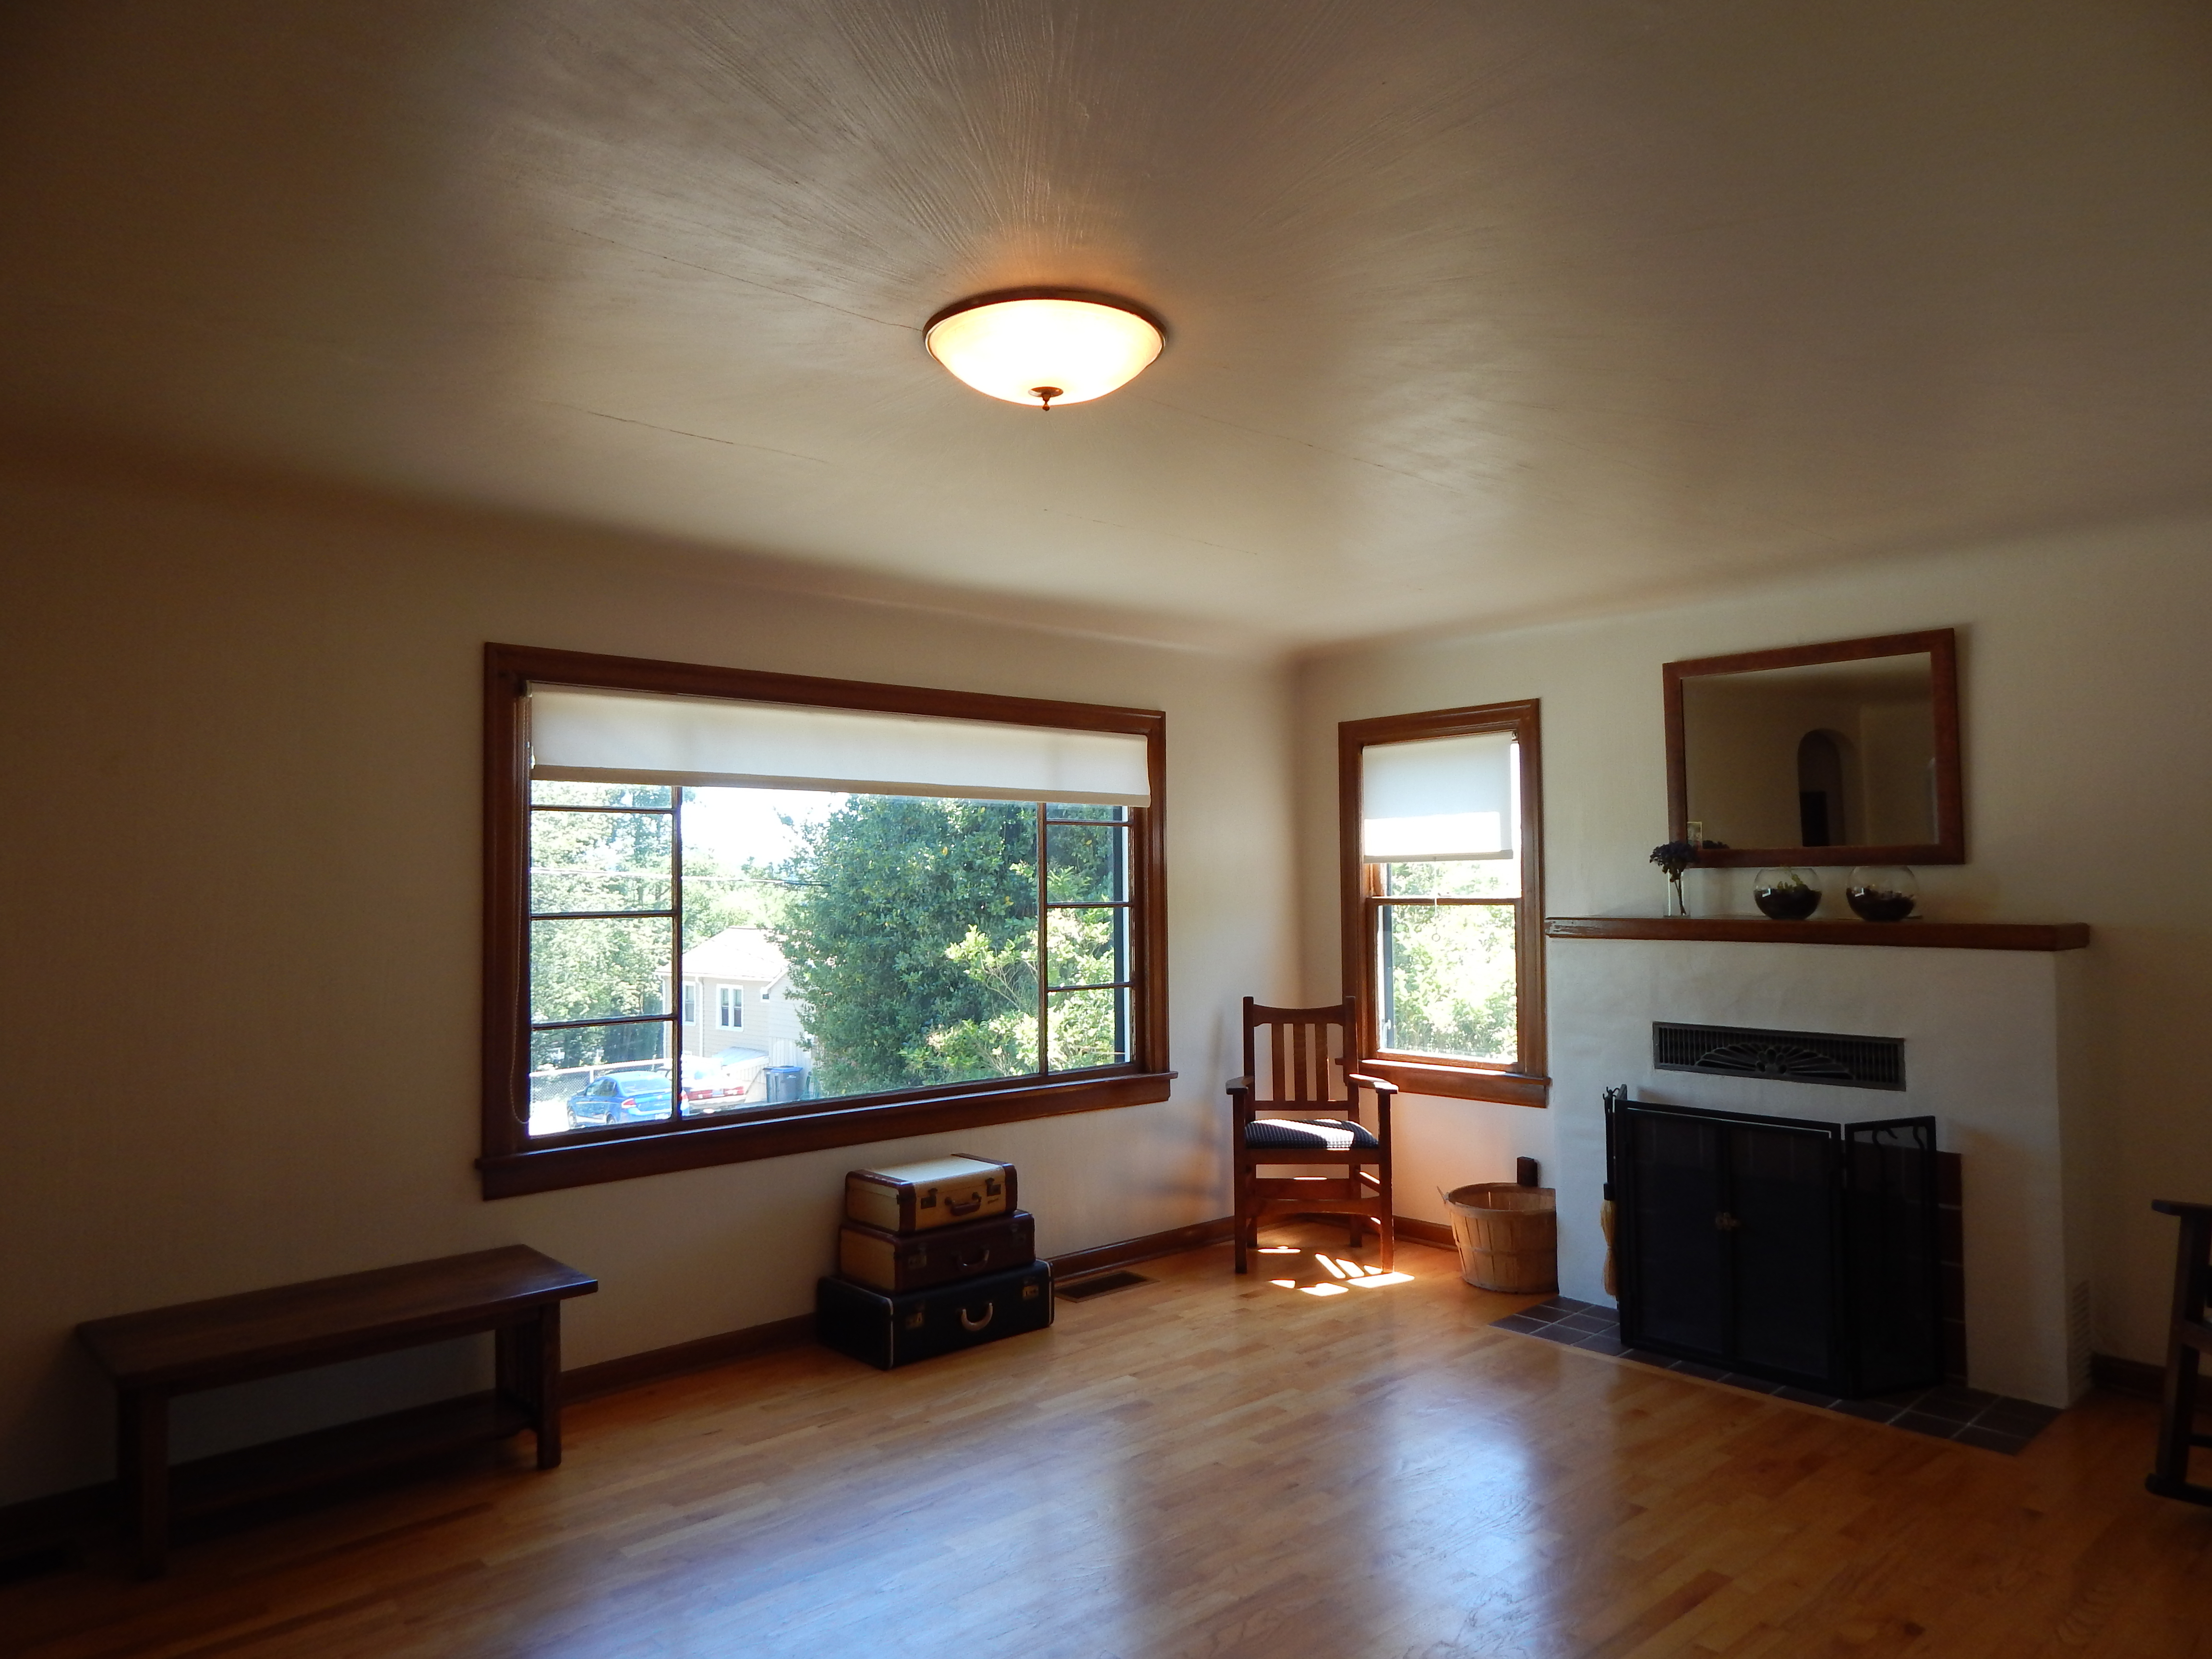 Property Photo: Interior of home 1111 Chester Ave  WA 98337 